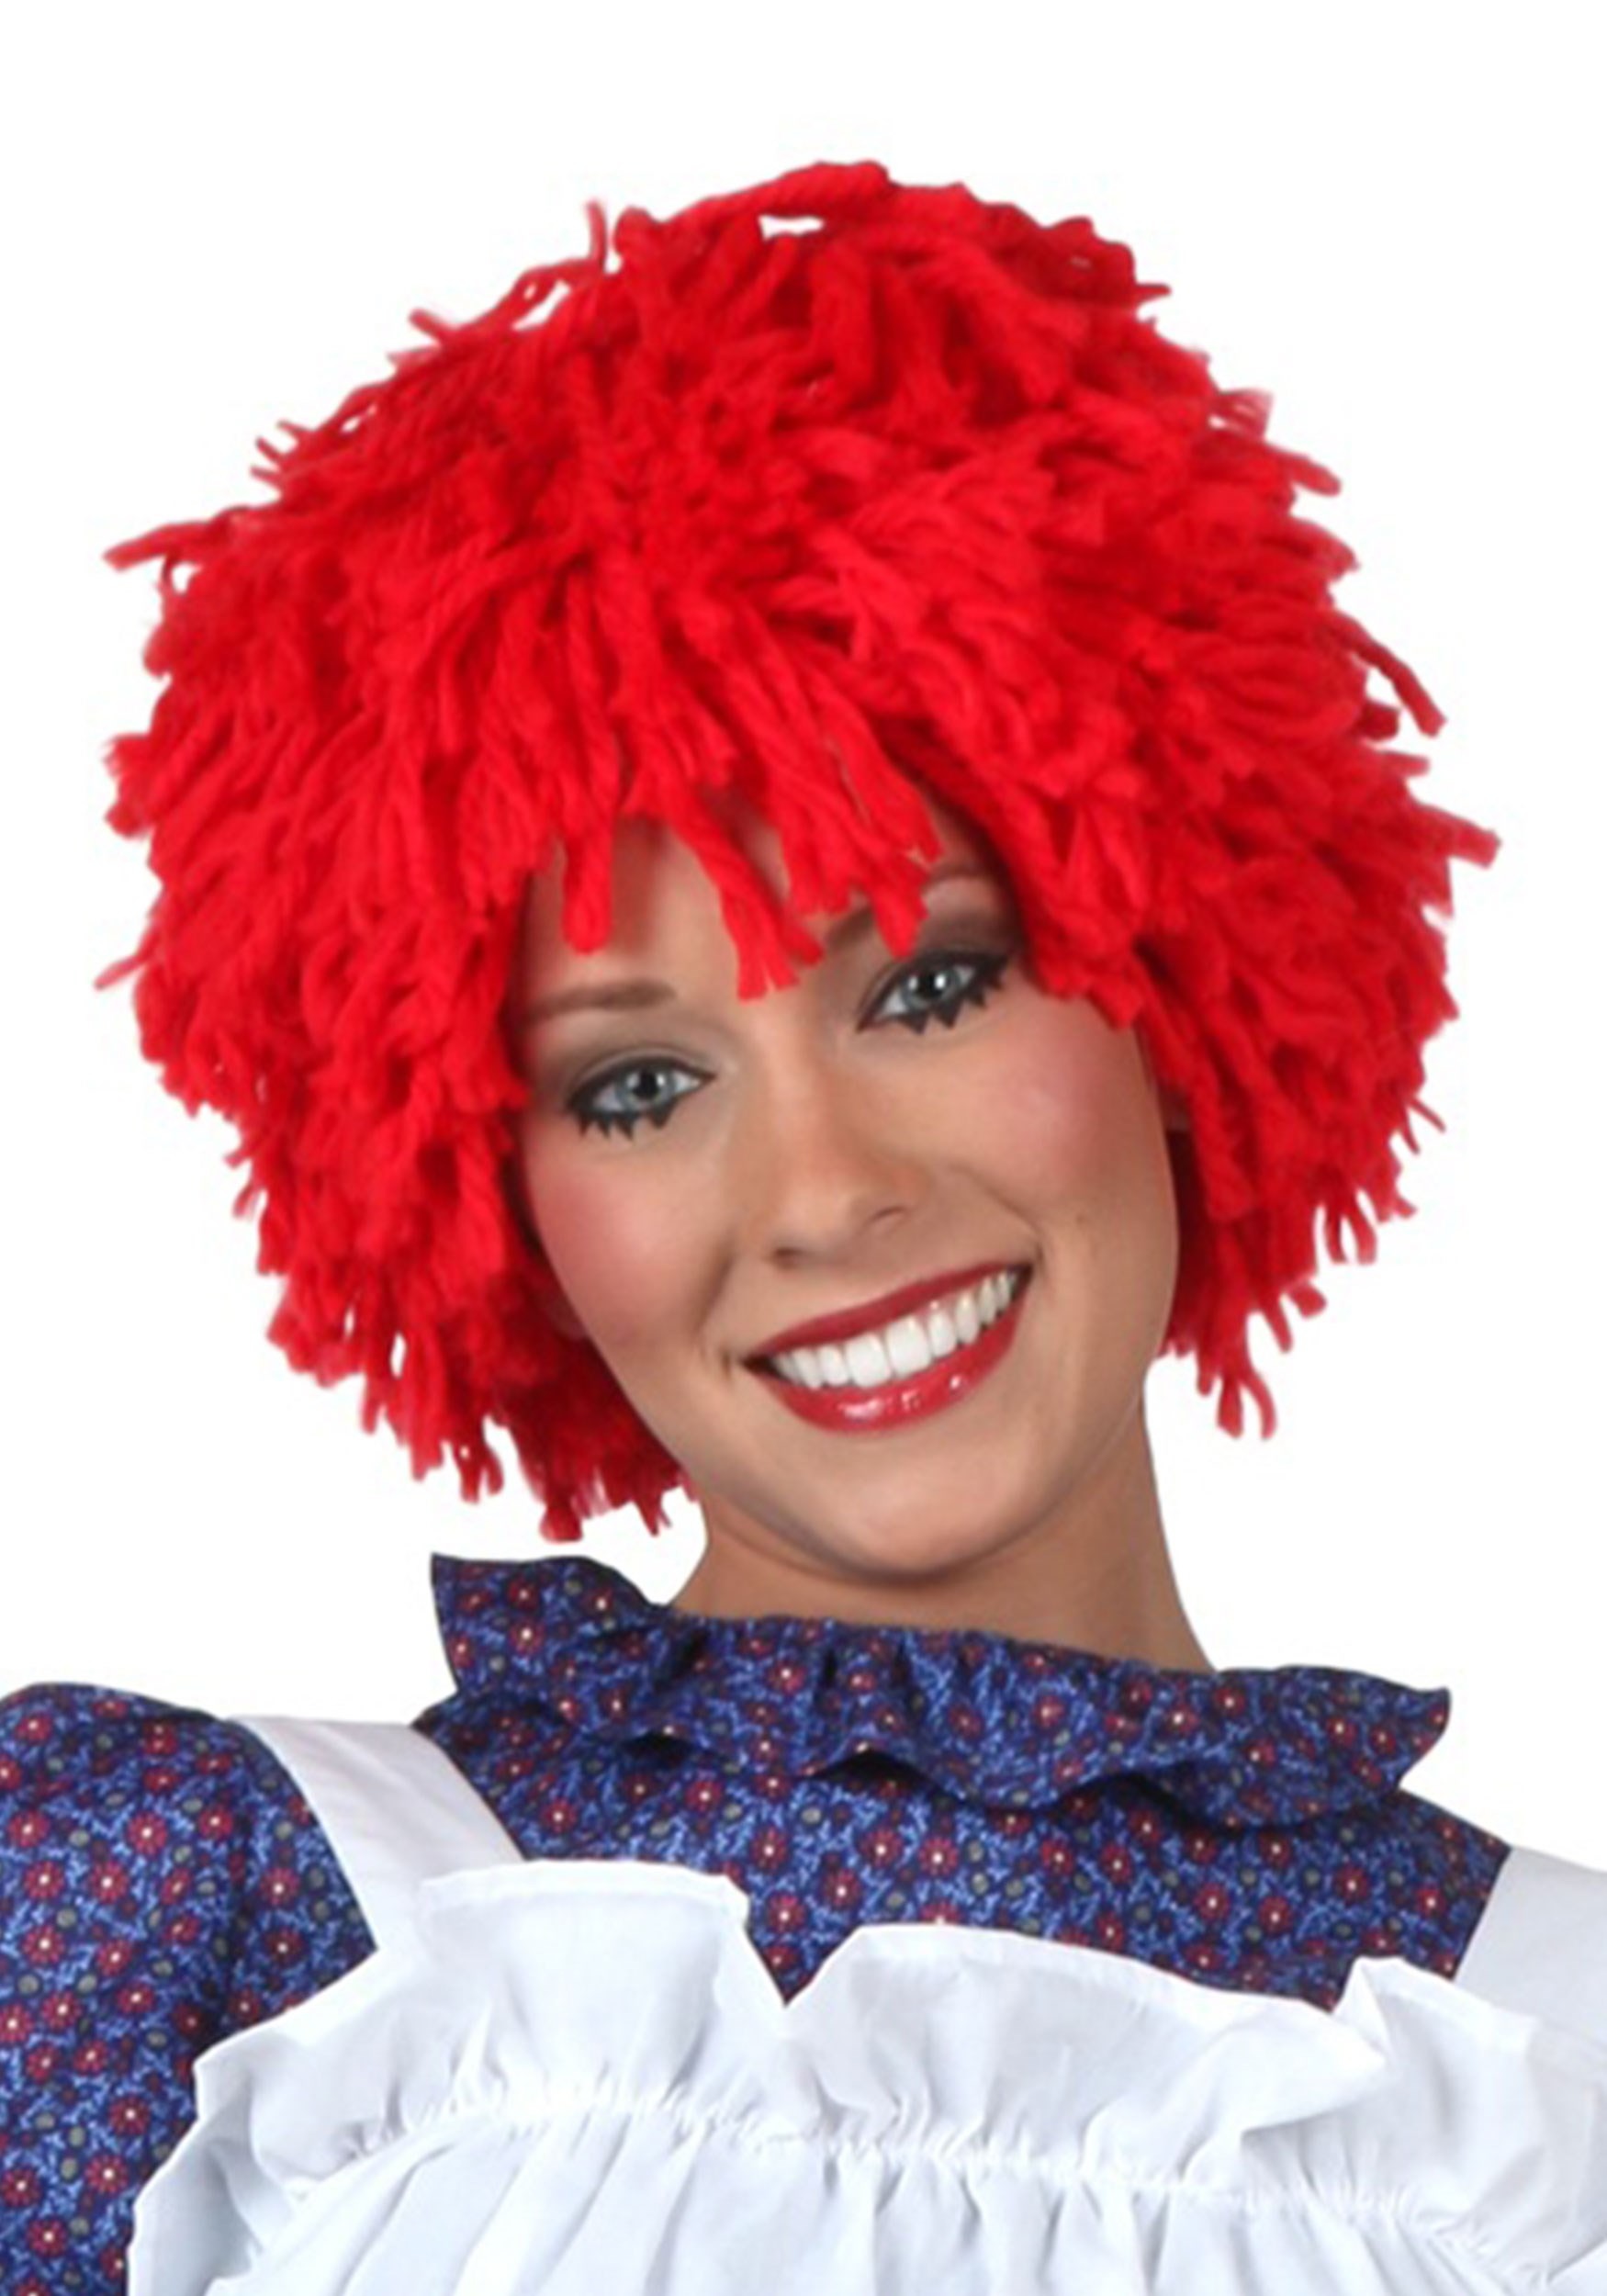 Rag Doll Wig Red Yarn Pigtail Style Adult Or Child Costume Accessory 